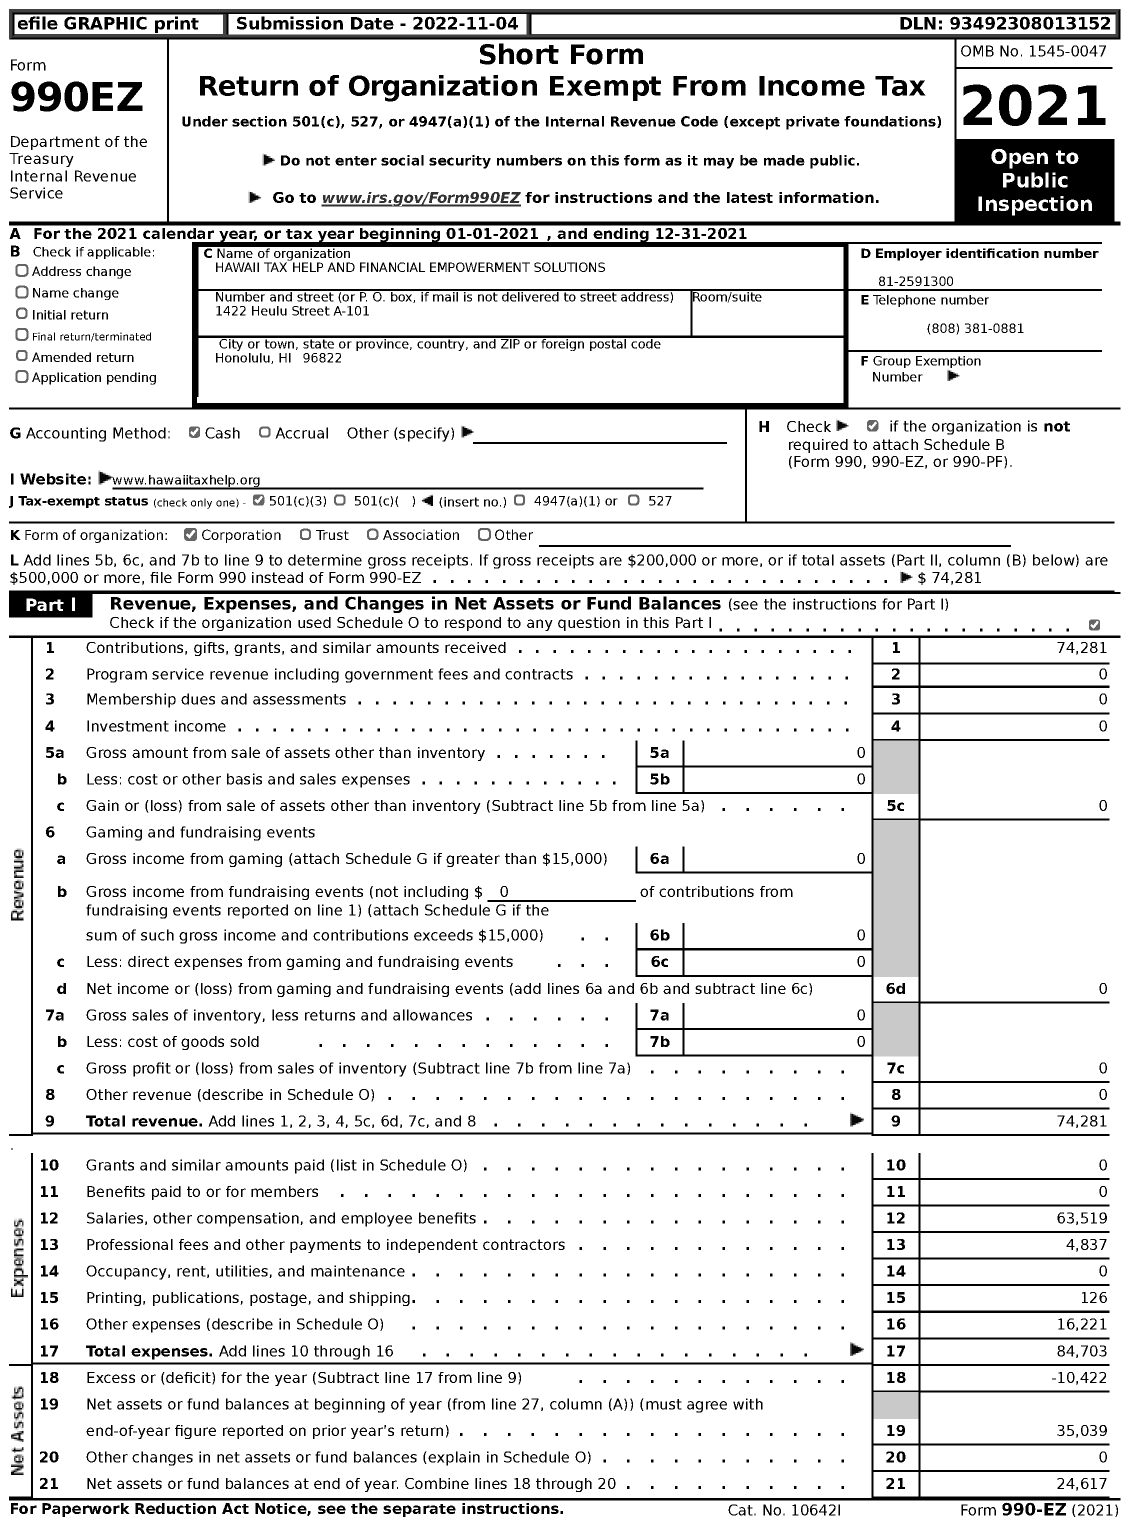 Image of first page of 2021 Form 990EZ for Hawaii Tax Help and Financial Empowerment Solutions